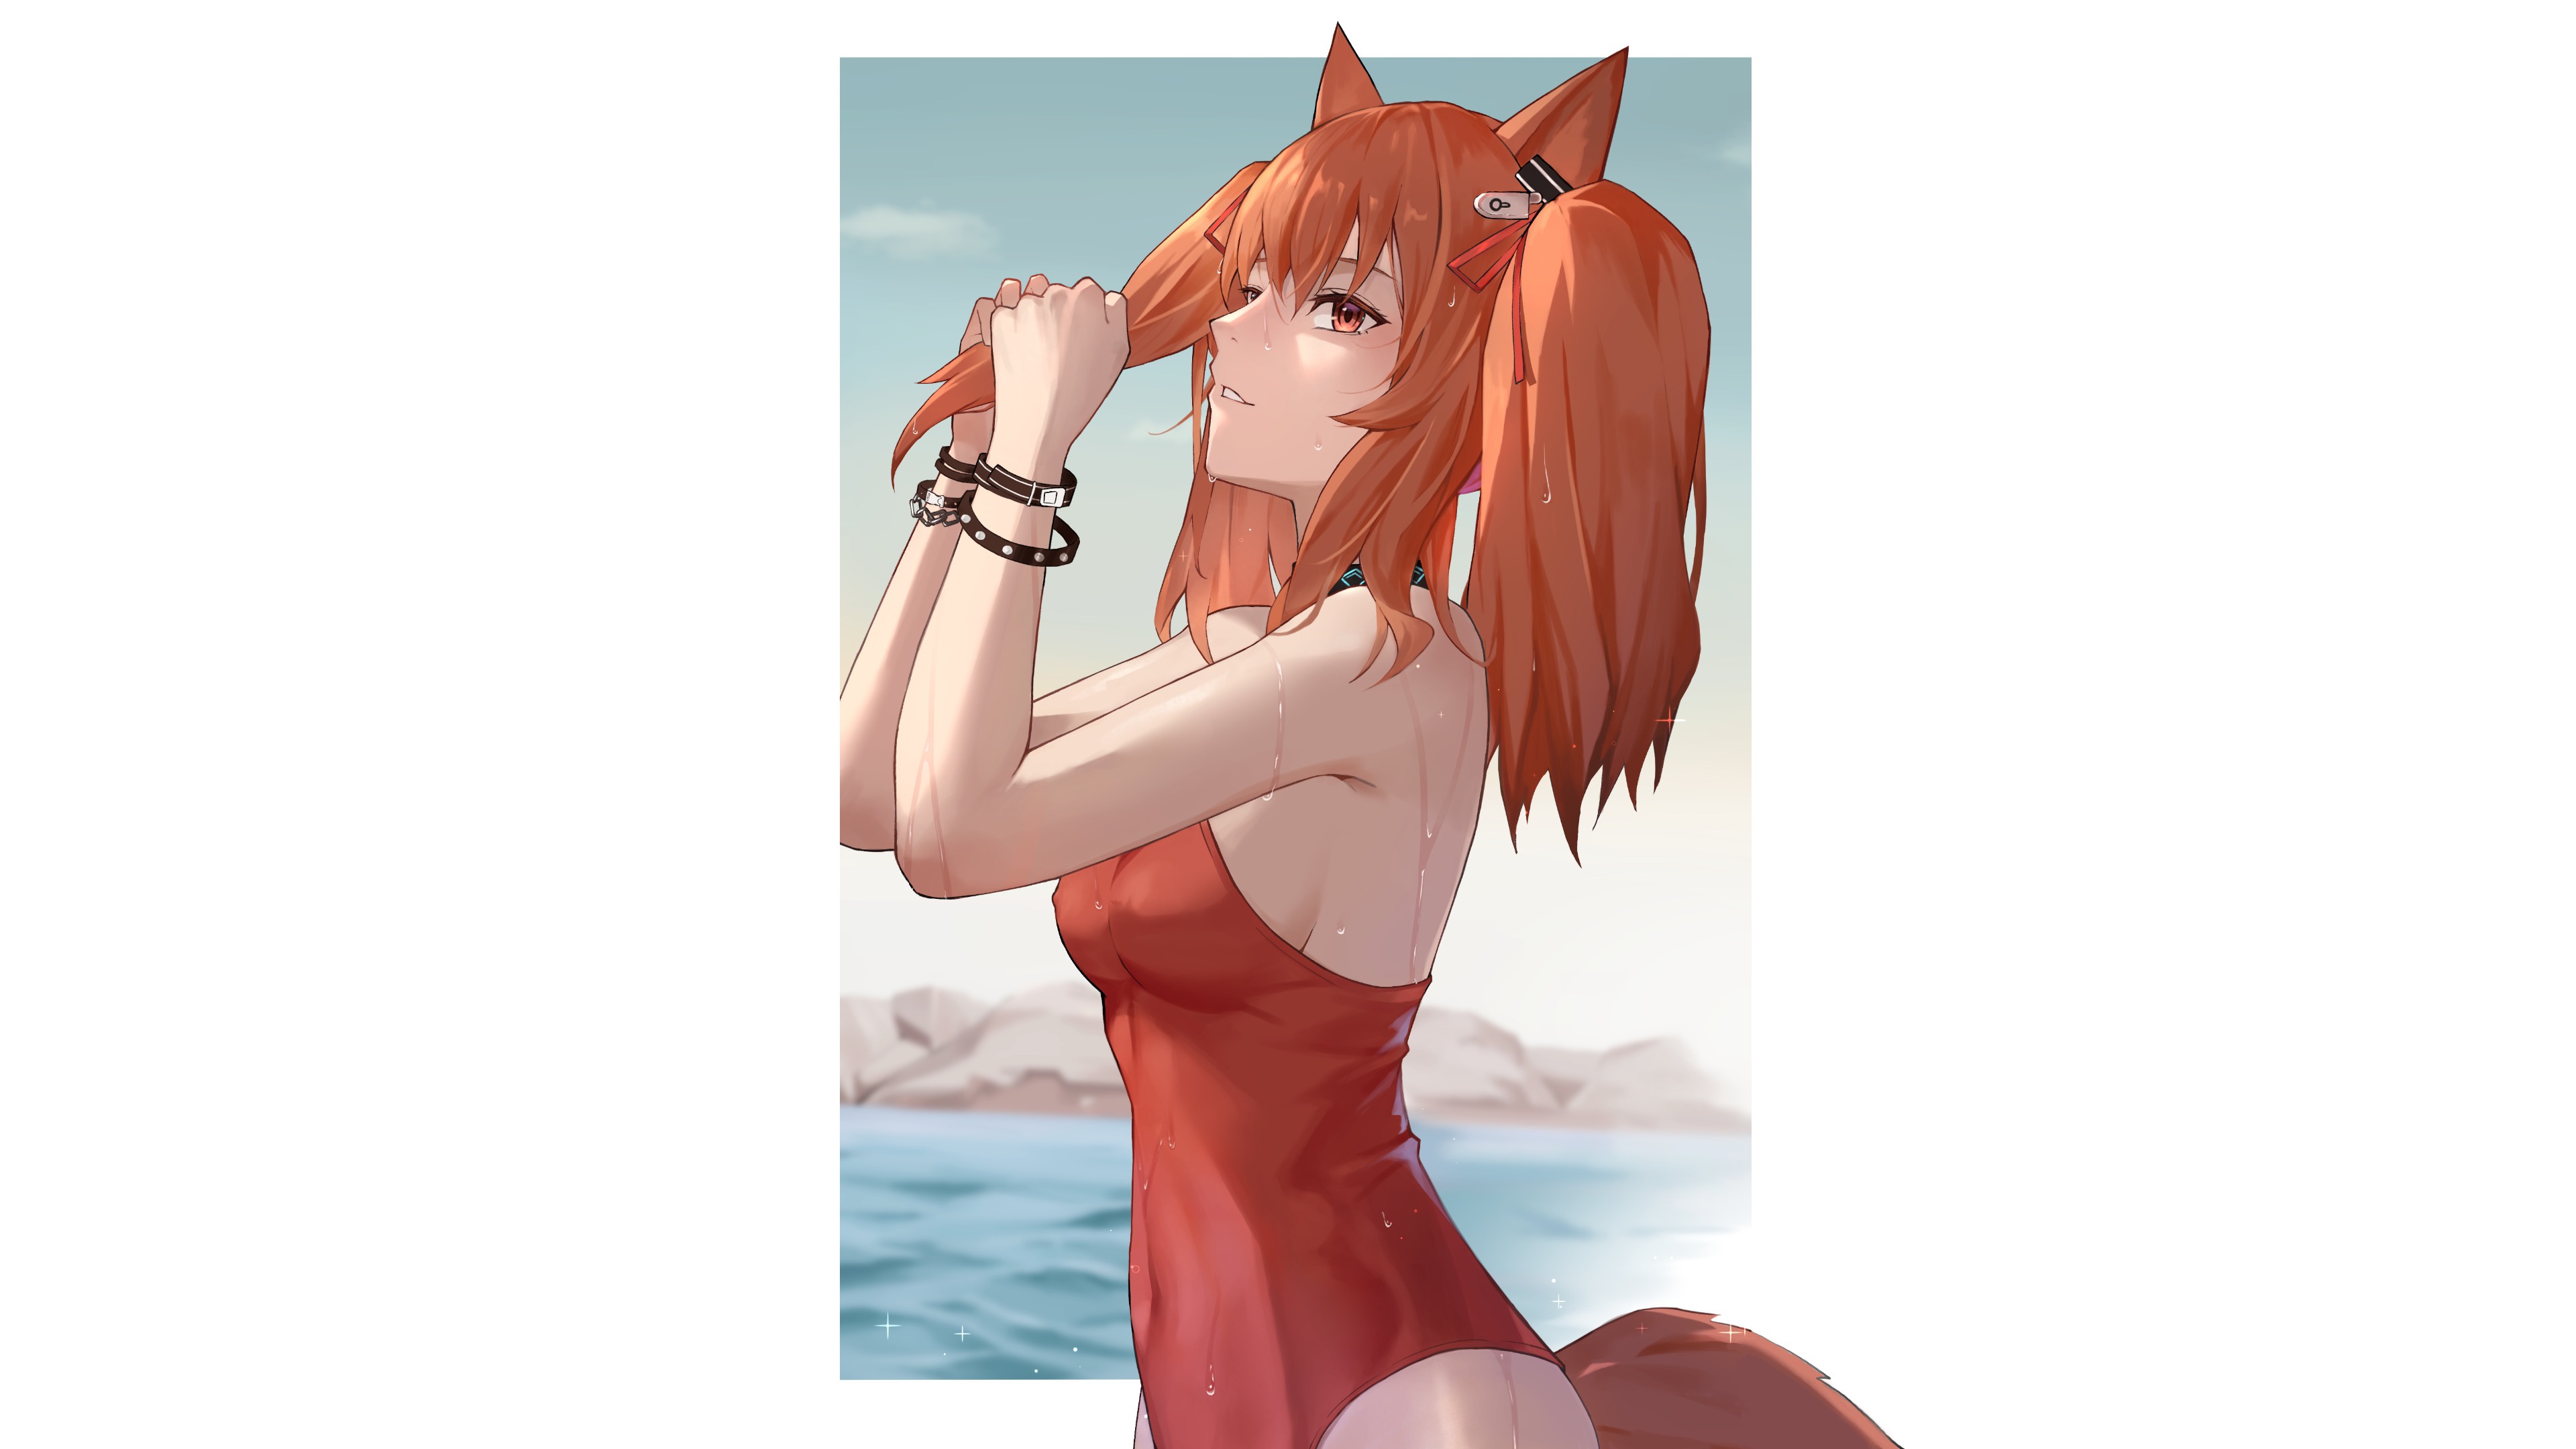 Red foxy girl